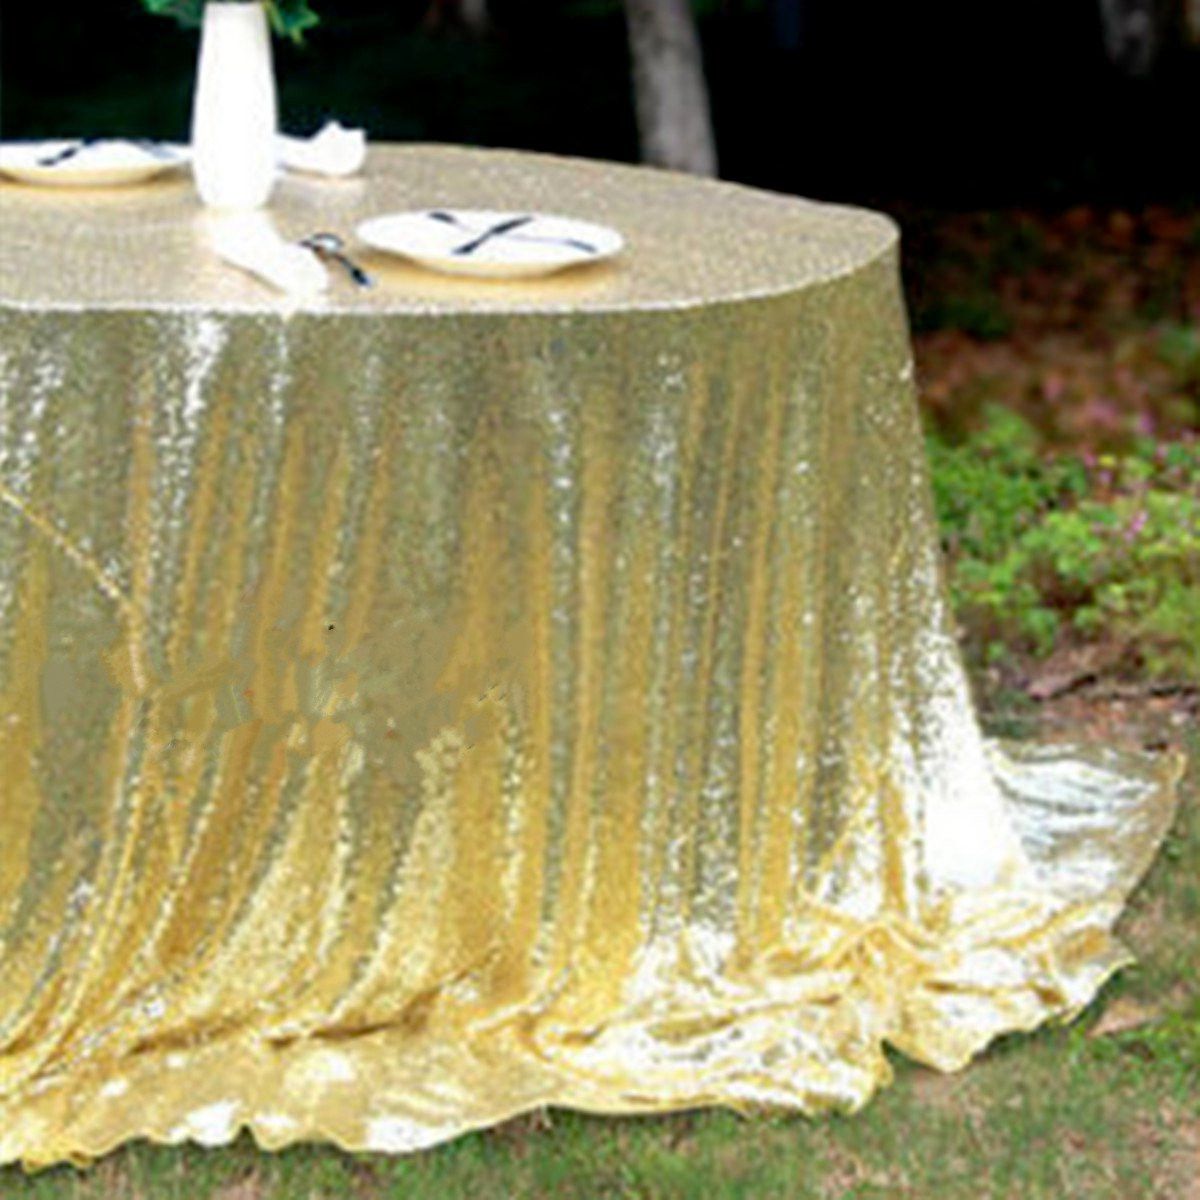 128x115cm-Champagne-Gold-Sparkly-Sequin-Tablecloth-Photo-Backdrop-Background-Studio-Prop-1169412